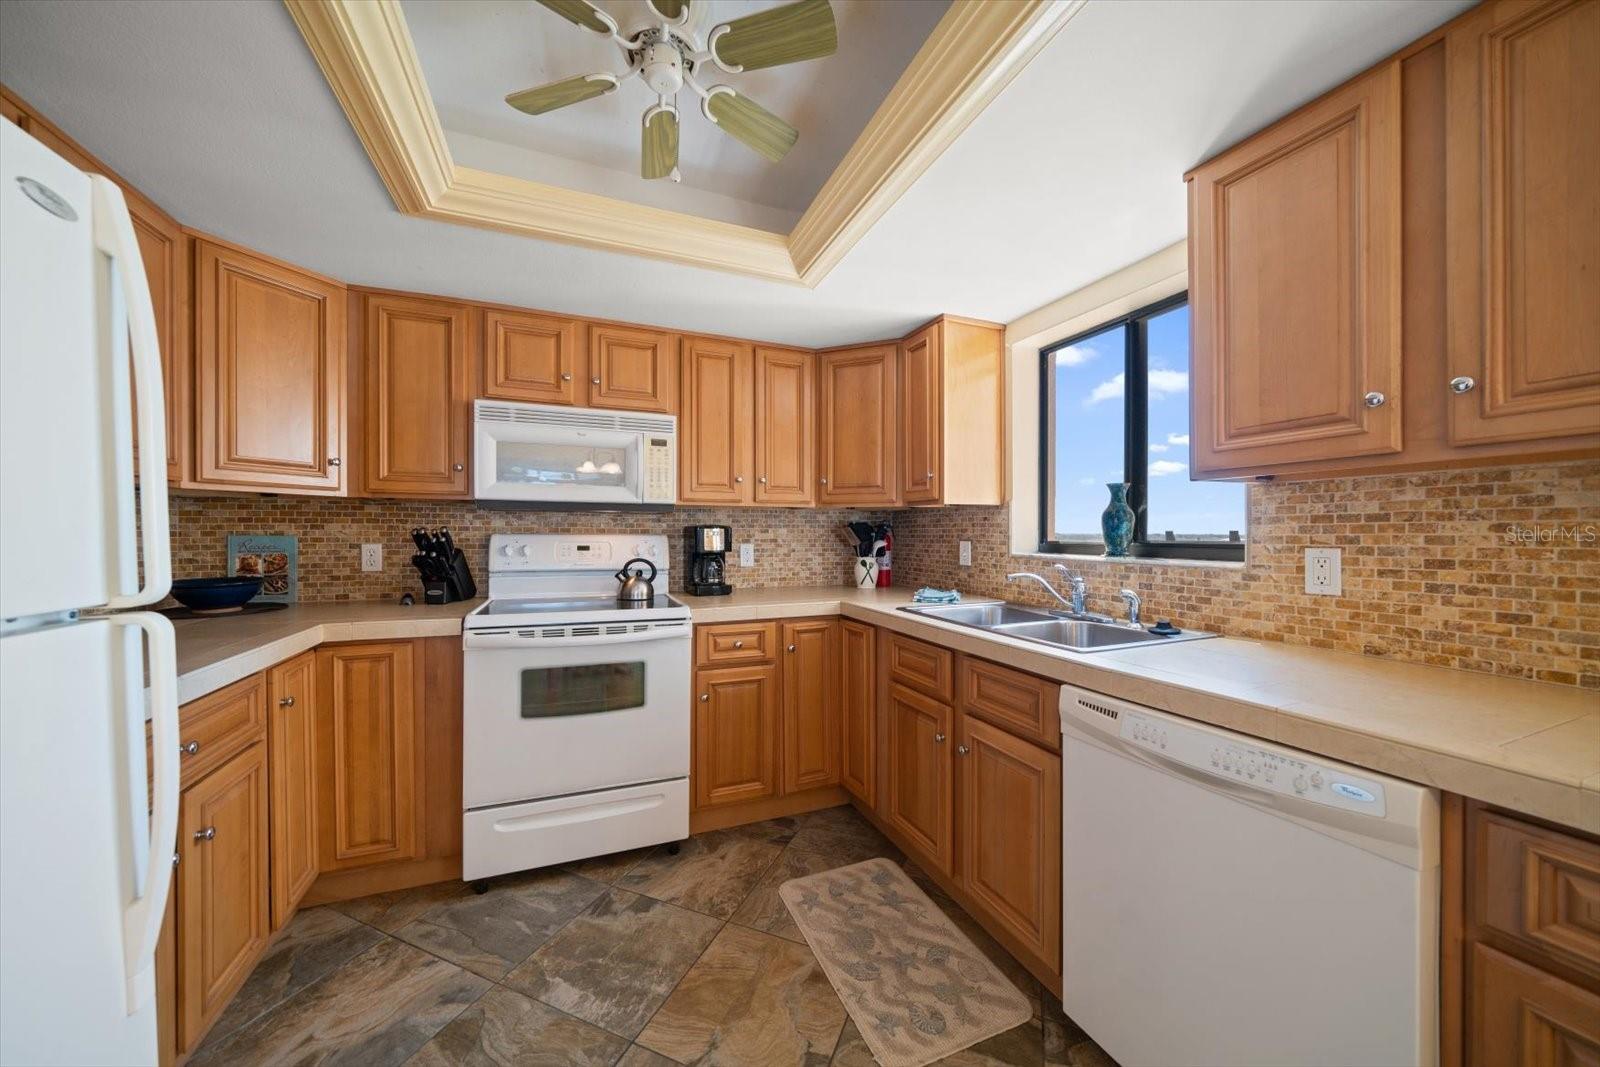 Kitchen has solid wood cabinets and is a delight for gourmet cooks.